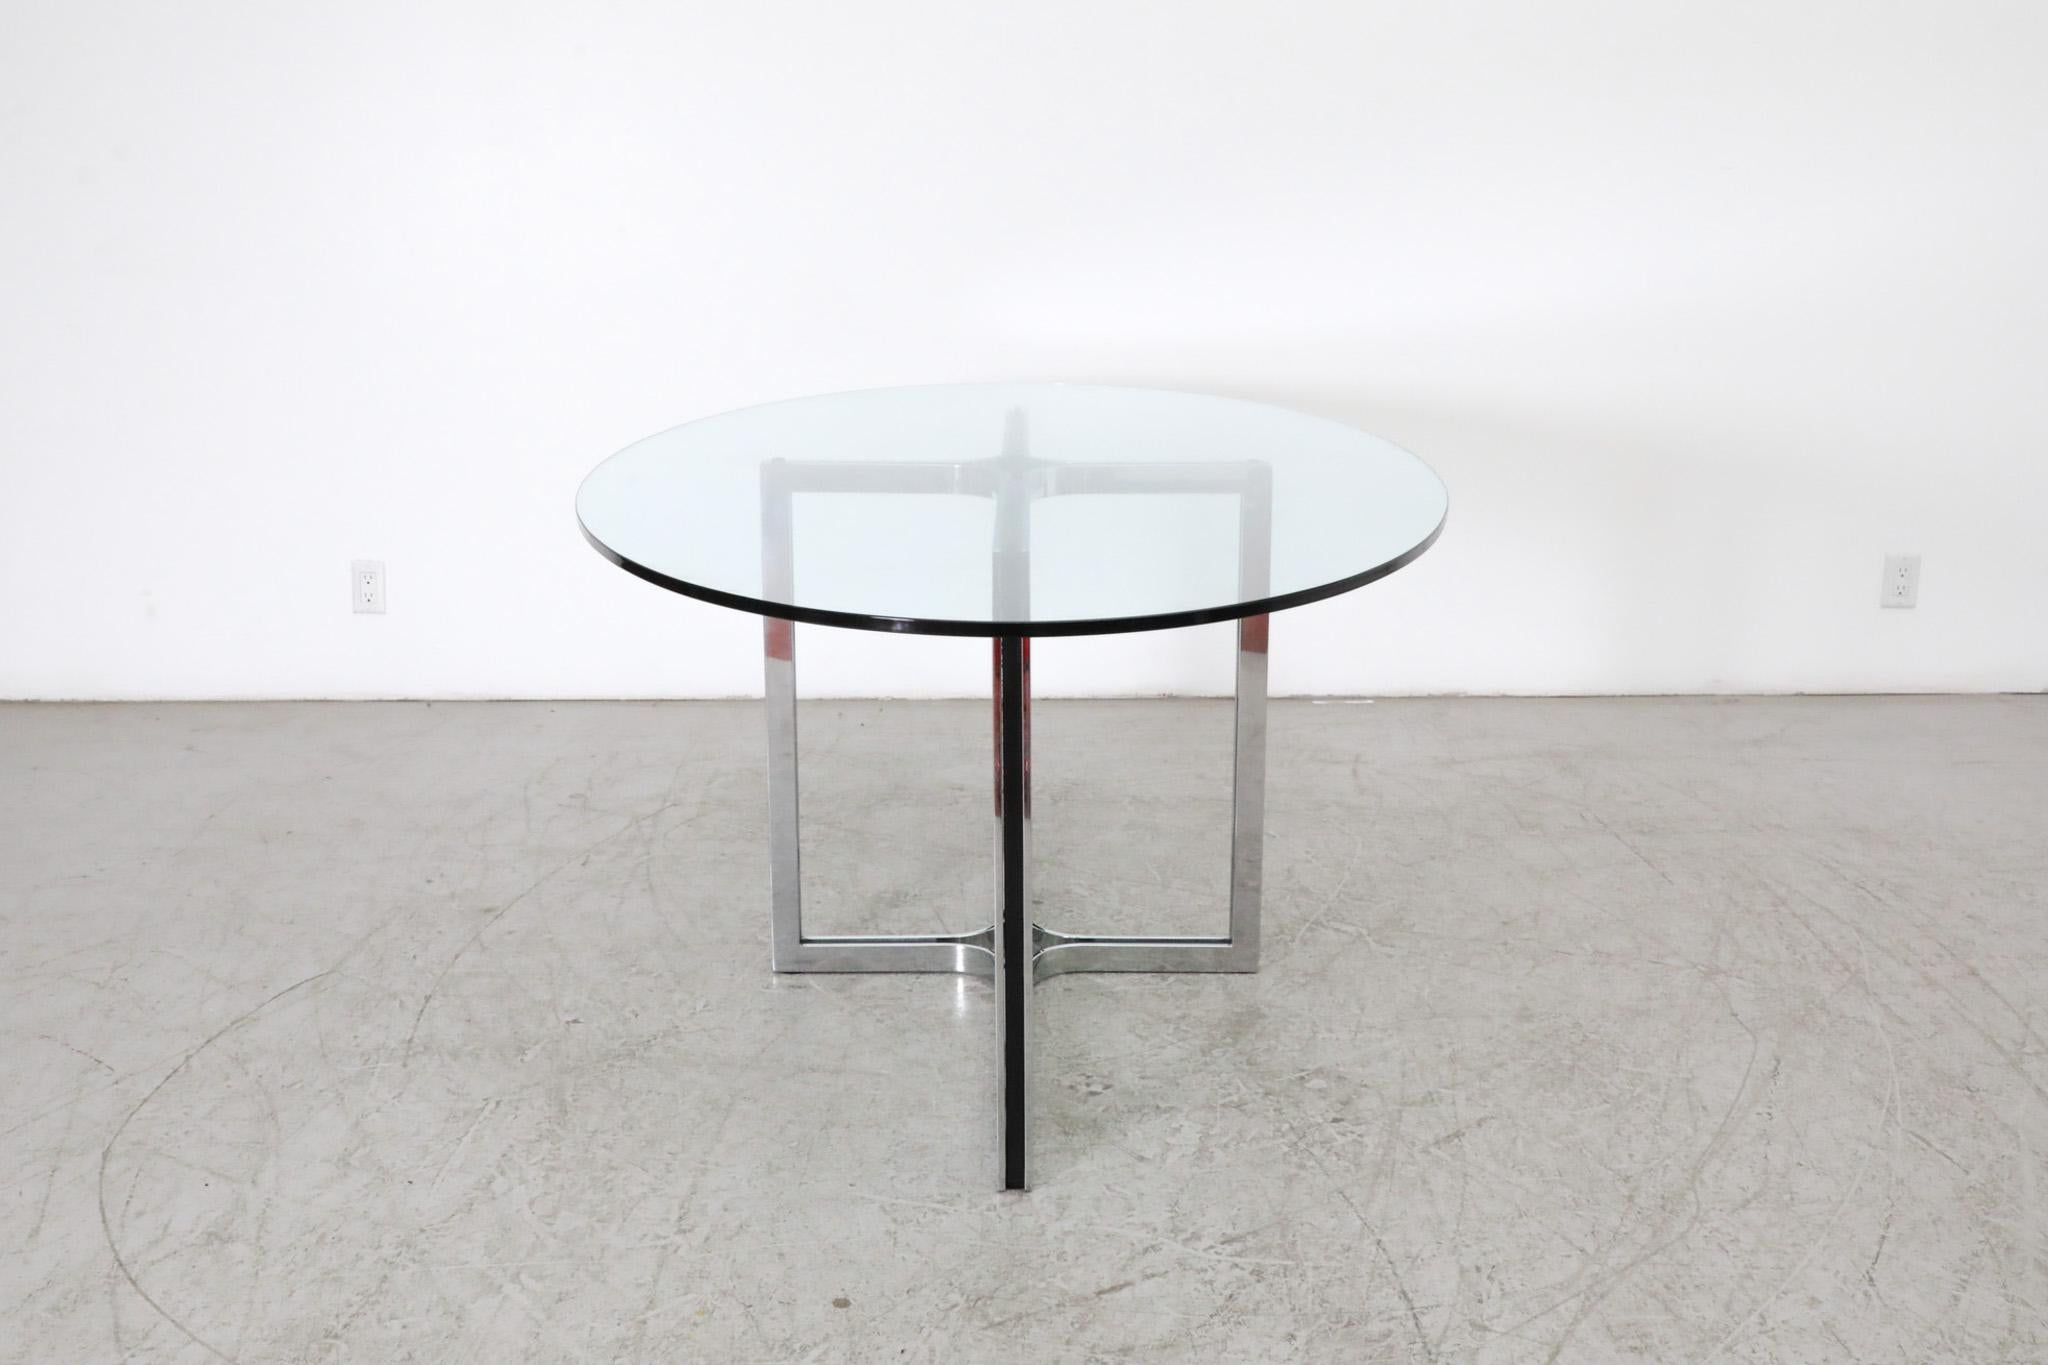 Late 20th Century Vintage Dining Table by Gastone Rinaldi for Thema Italy 1, Italy, 1970s For Sale